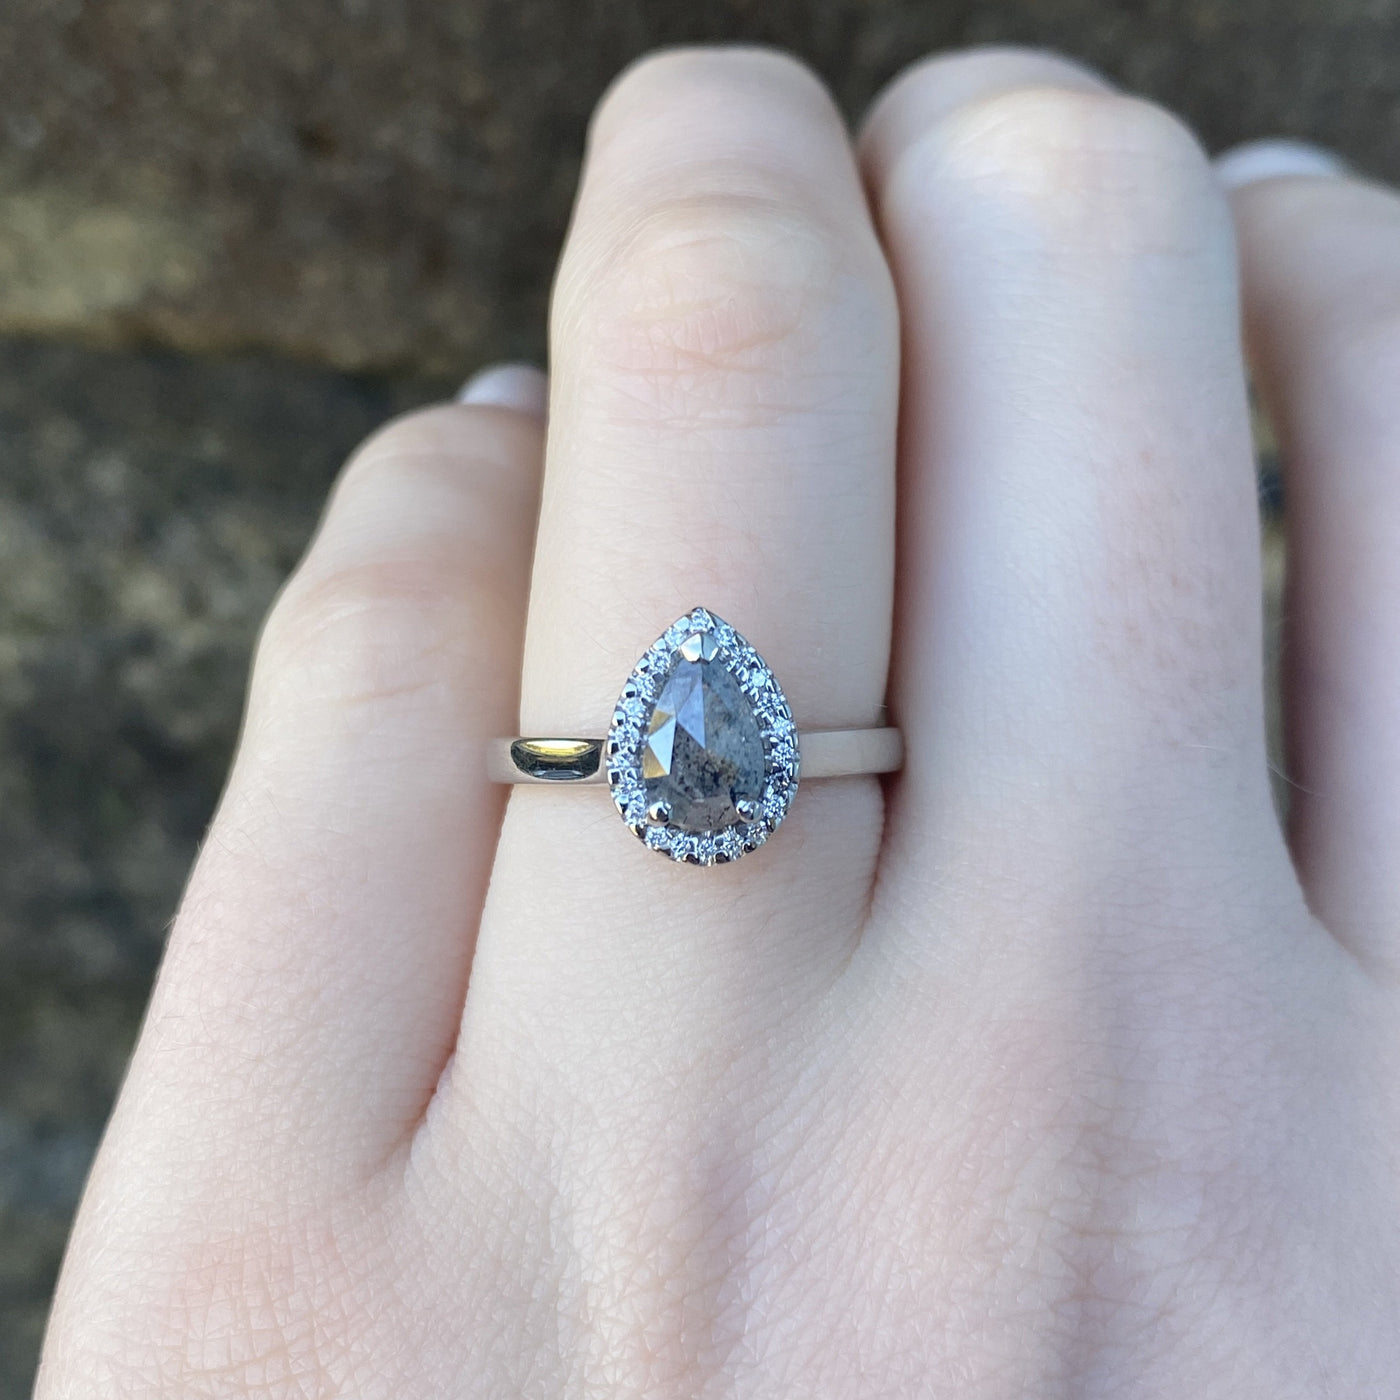 Winter - Teardrop/Pear Shaped Salt & Pepper Diamond with Halo Engagement Ring - Made-To-Order